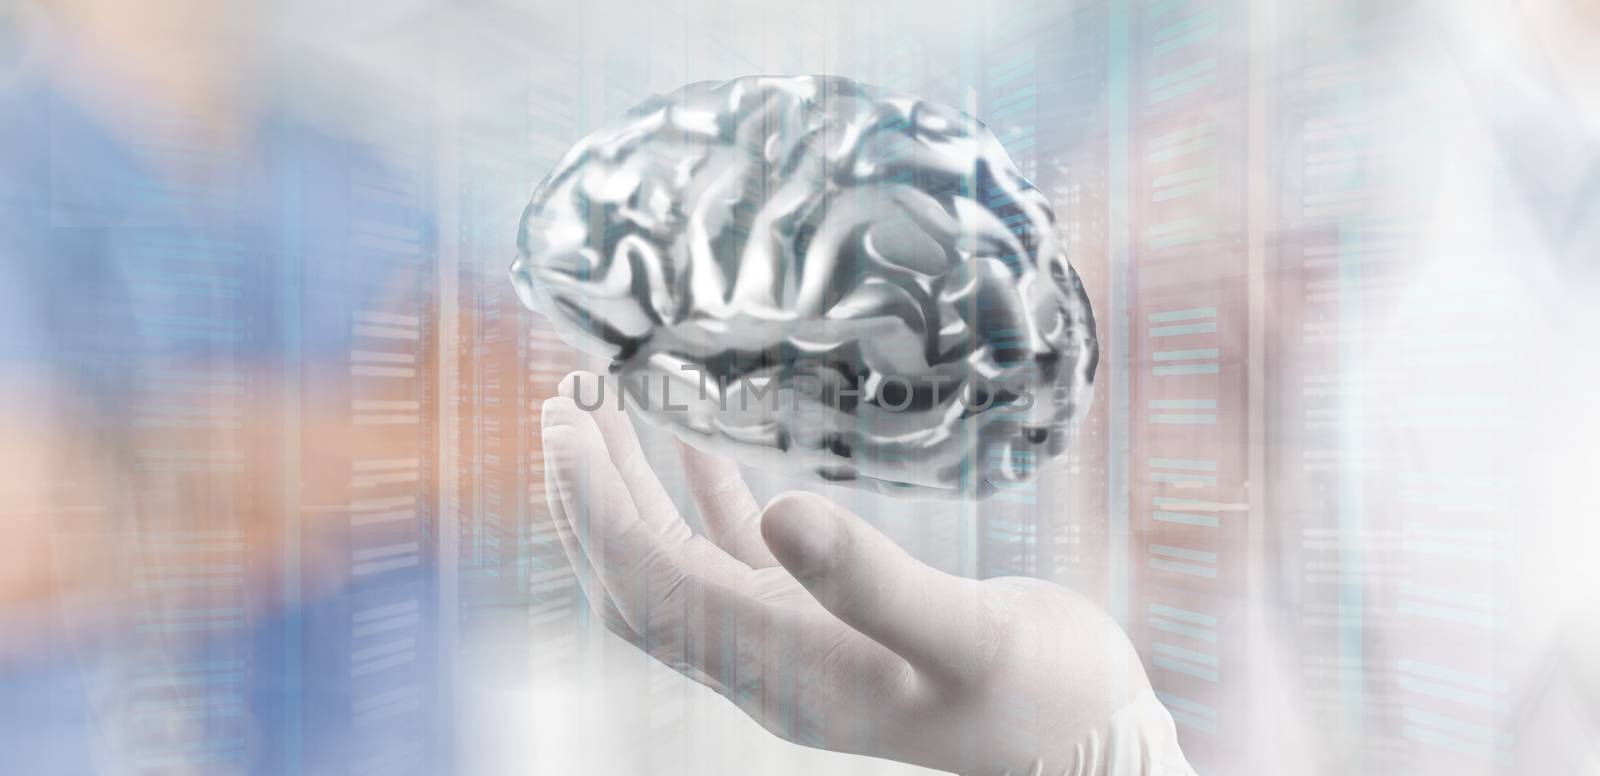 Double exposure of doctor neurologist hand show metal brain with computer interface as concept